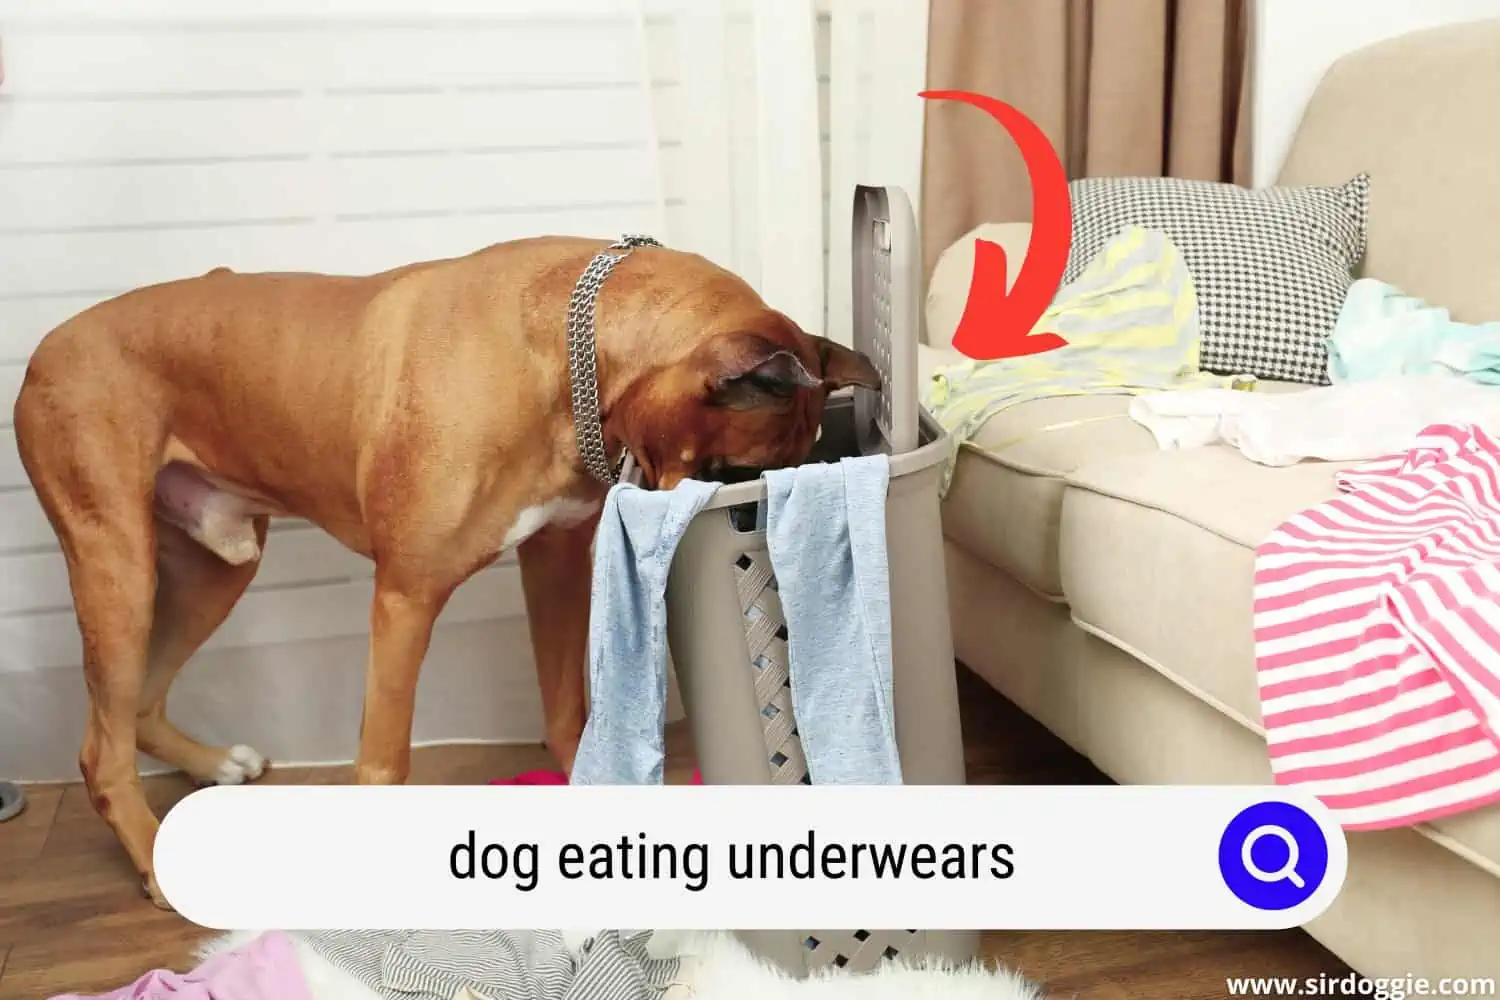 A dog messing and eating the clothes inside the basket